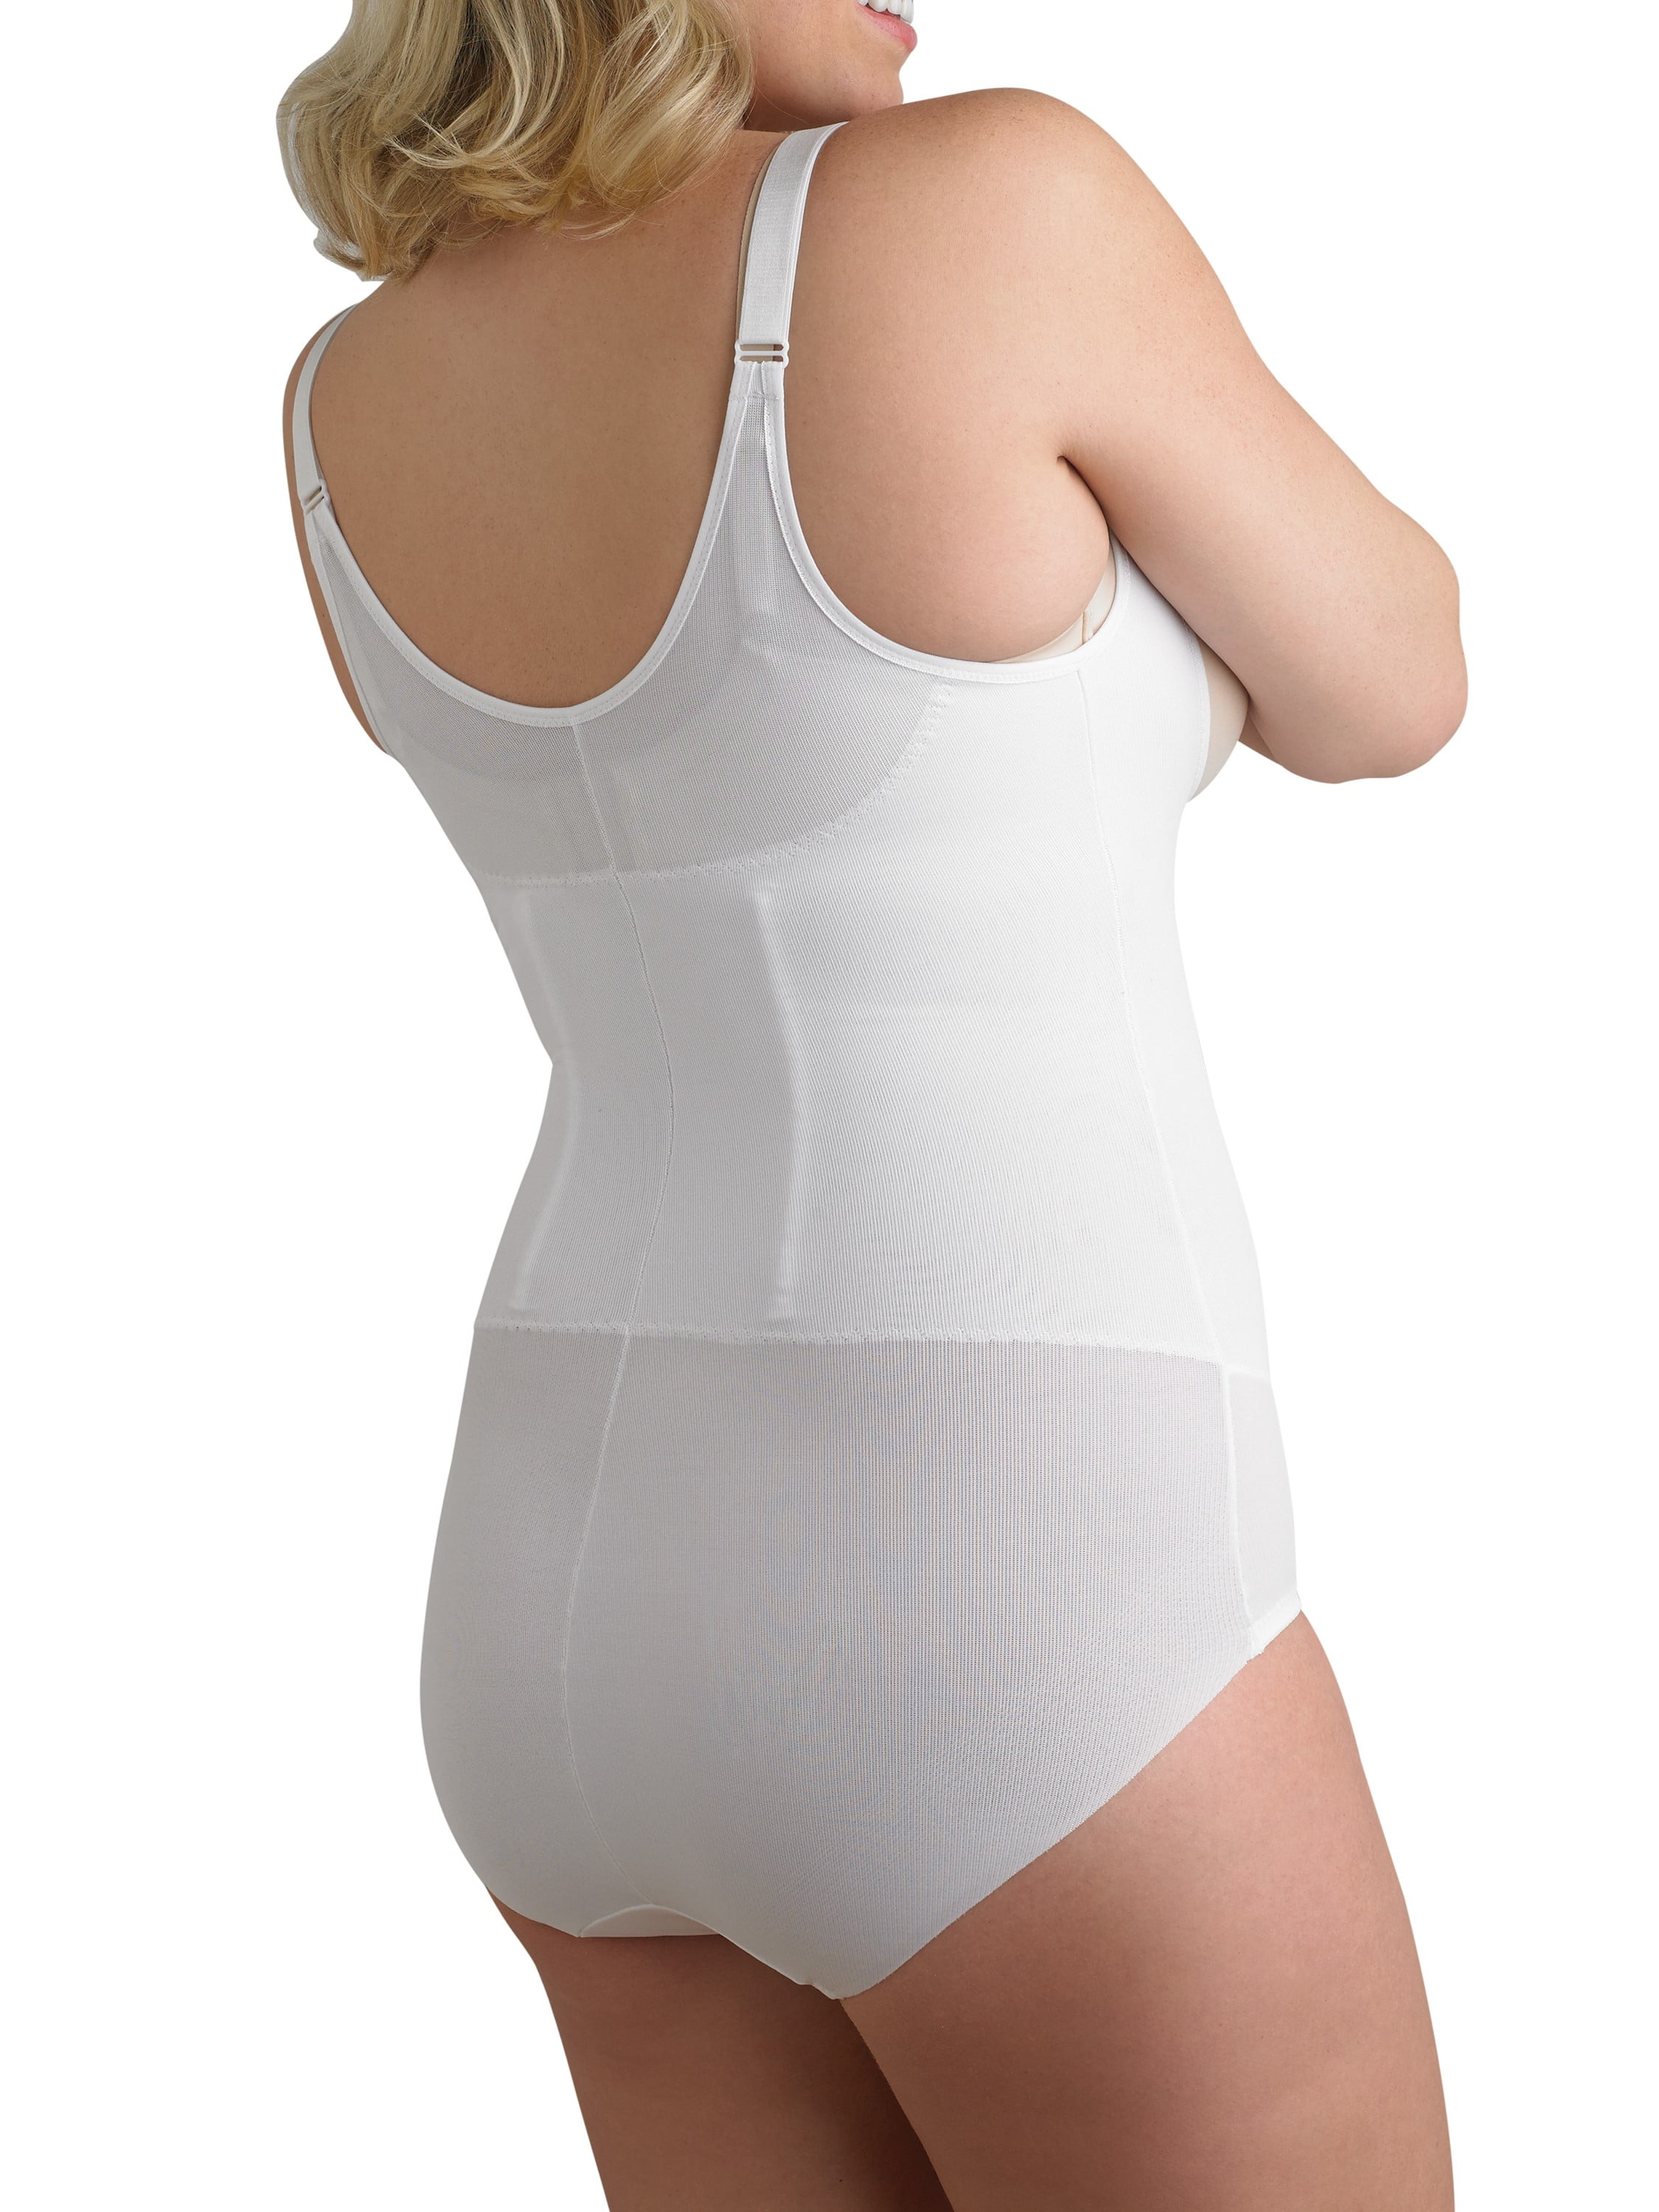 Cupid Women's Plus Size Extra Firm Control Back Magic Open-Bust